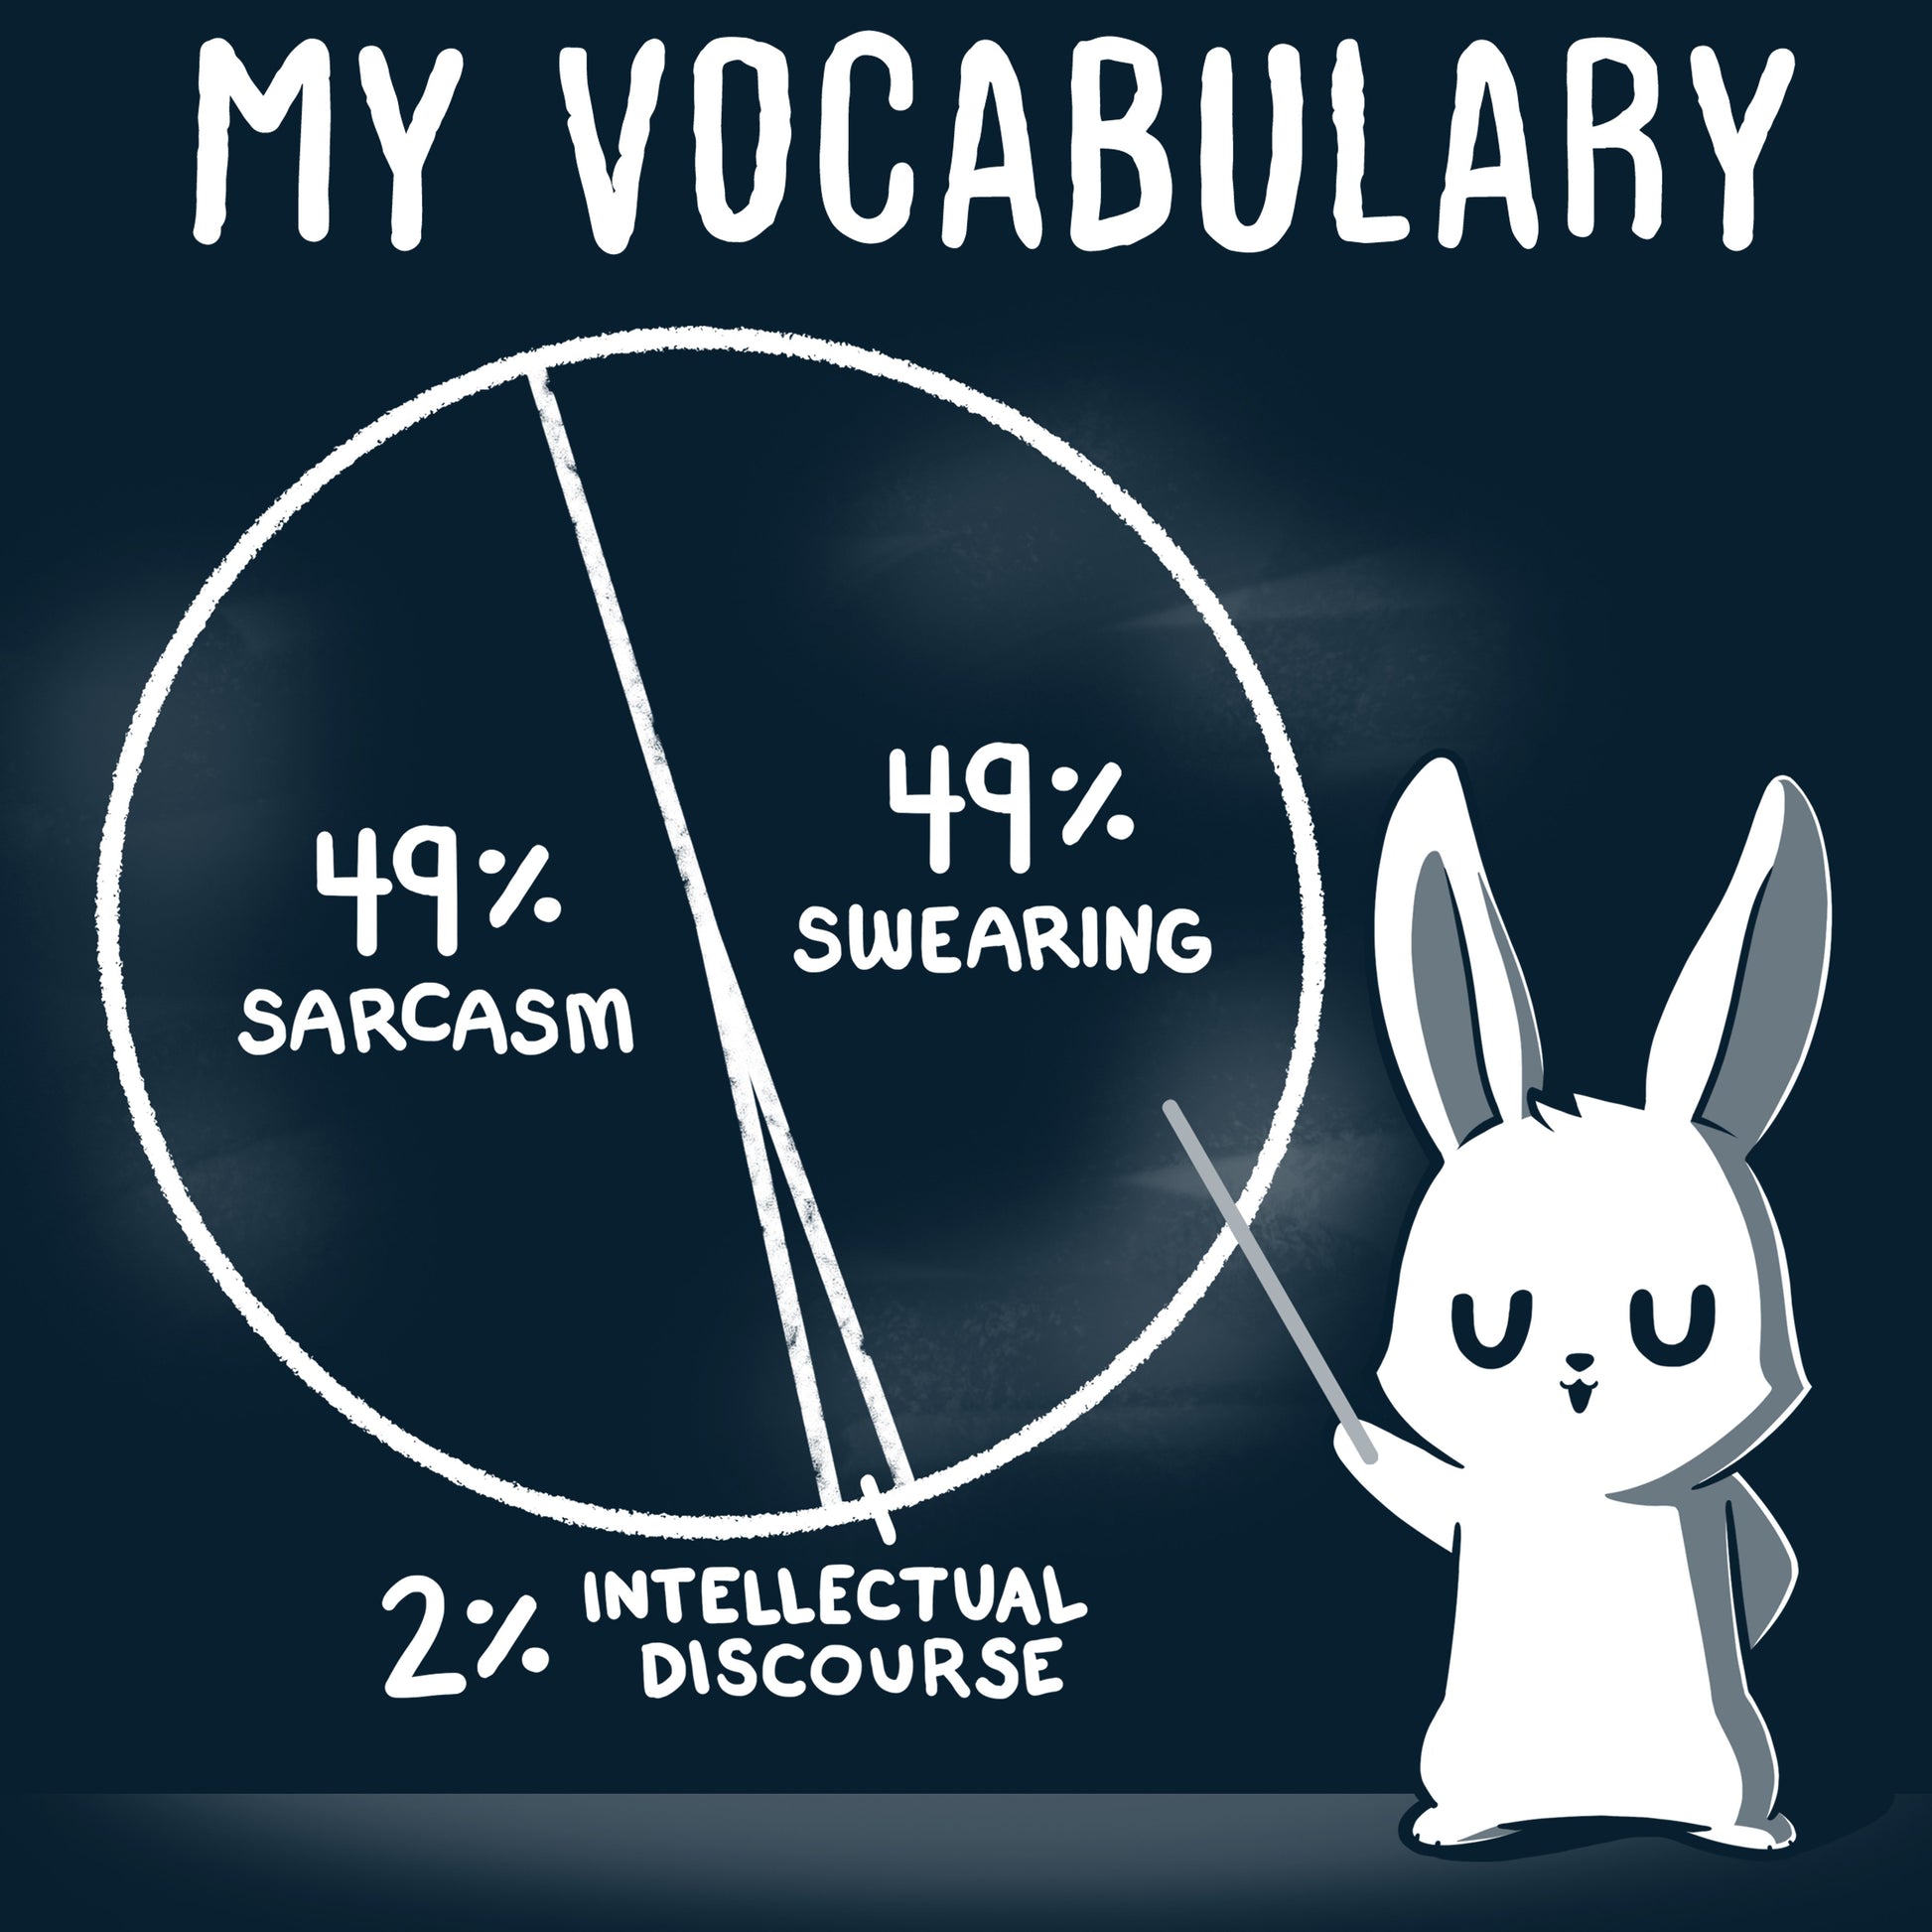 A pie chart labeled "My Vocabulary" showing 49% sarcasm, 49% swearing, and 2% intellectual discourse is printed on a Navy Blue My Vocabulary t-shirt made of Super Soft Ringspun Cotton by monsterdigital. A cartoon rabbit with a pointer stands next to the chart.